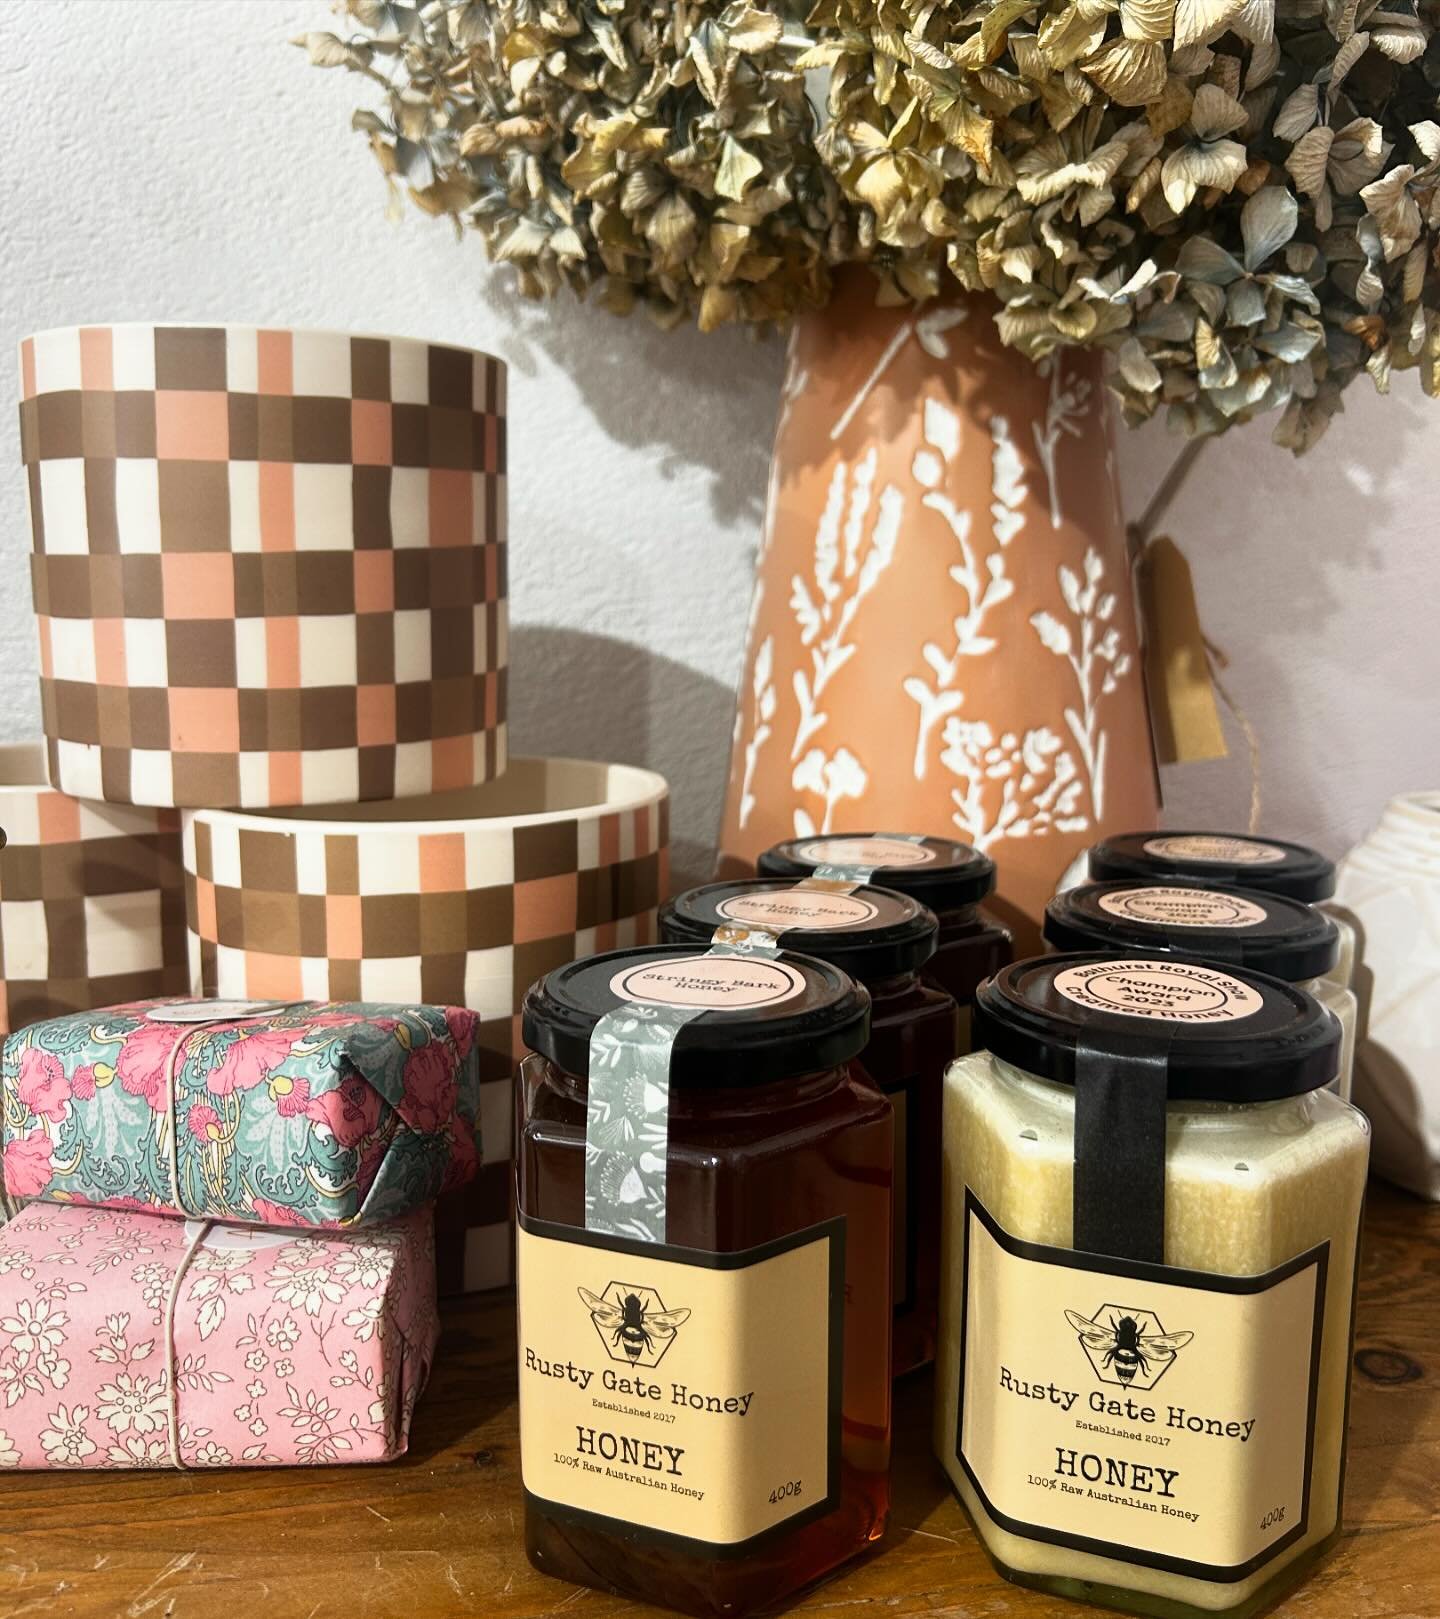 Have you tried @rusty_gate_honey_farm honey 🍯 it is to die for!! 
Stringy bark honey $13.00
Creamed honey $17.50